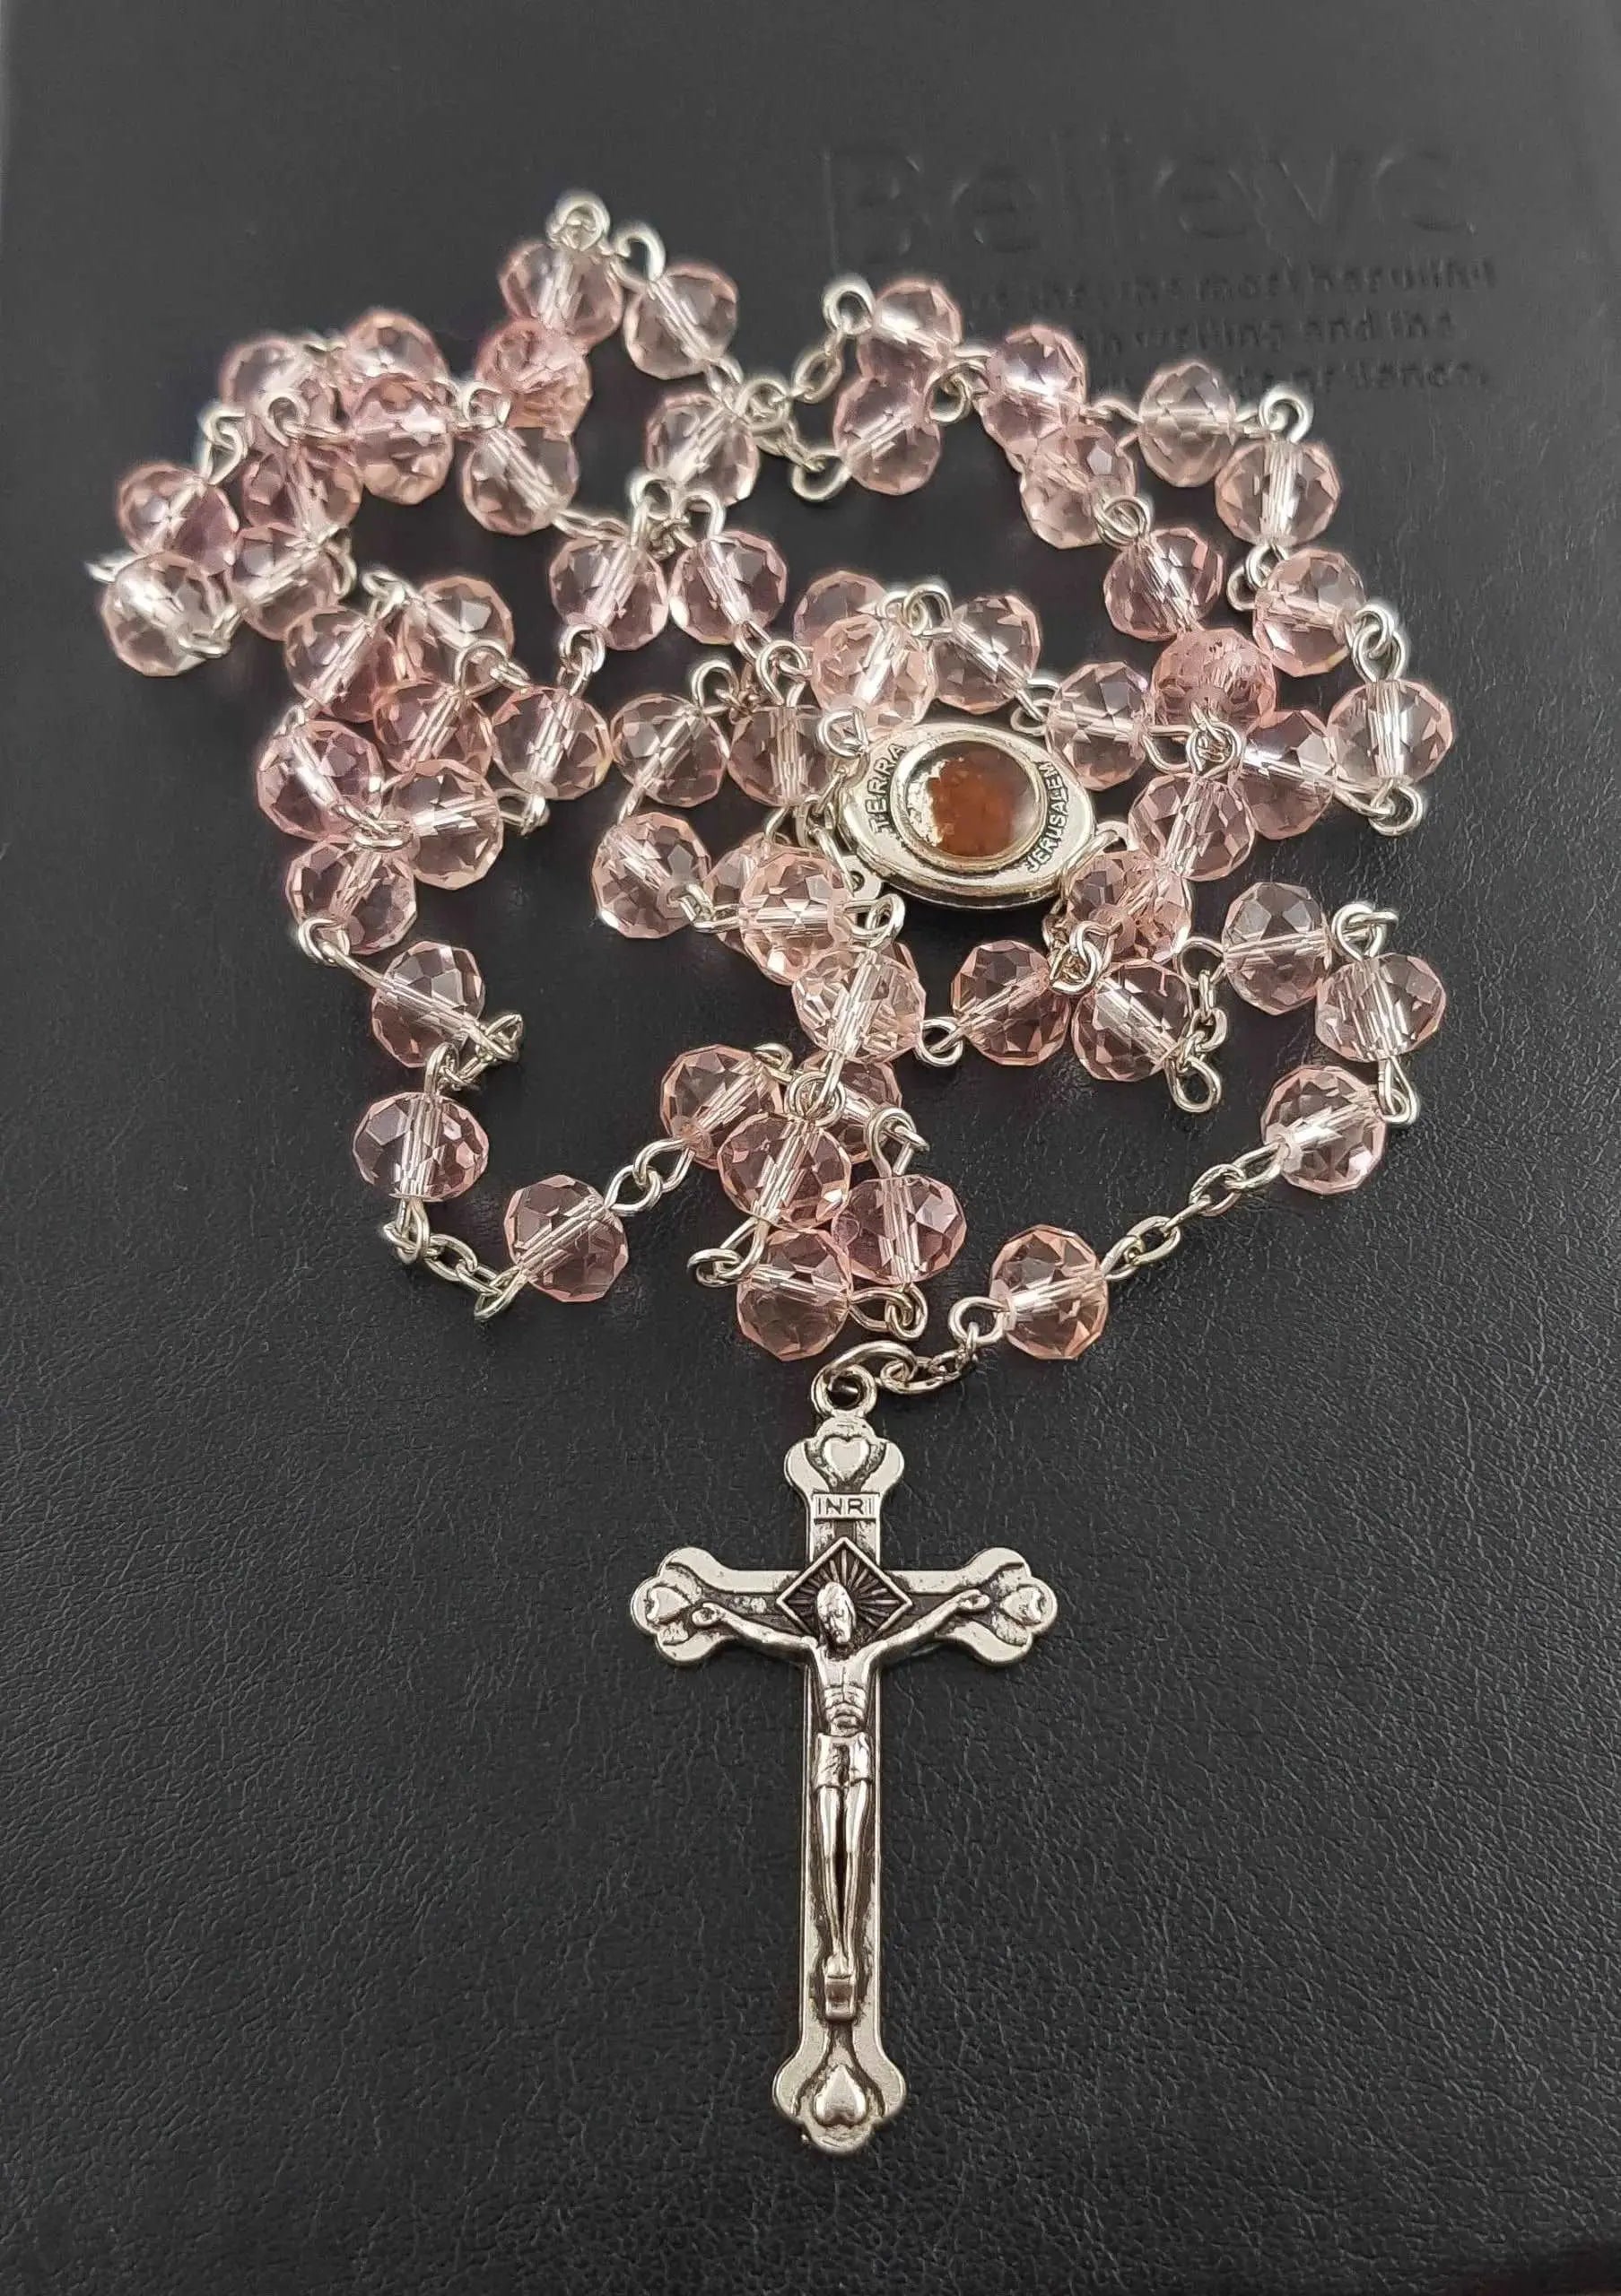 Light Pink Crystal Beads Rosary Catholic Necklace Holy Soil Medal 